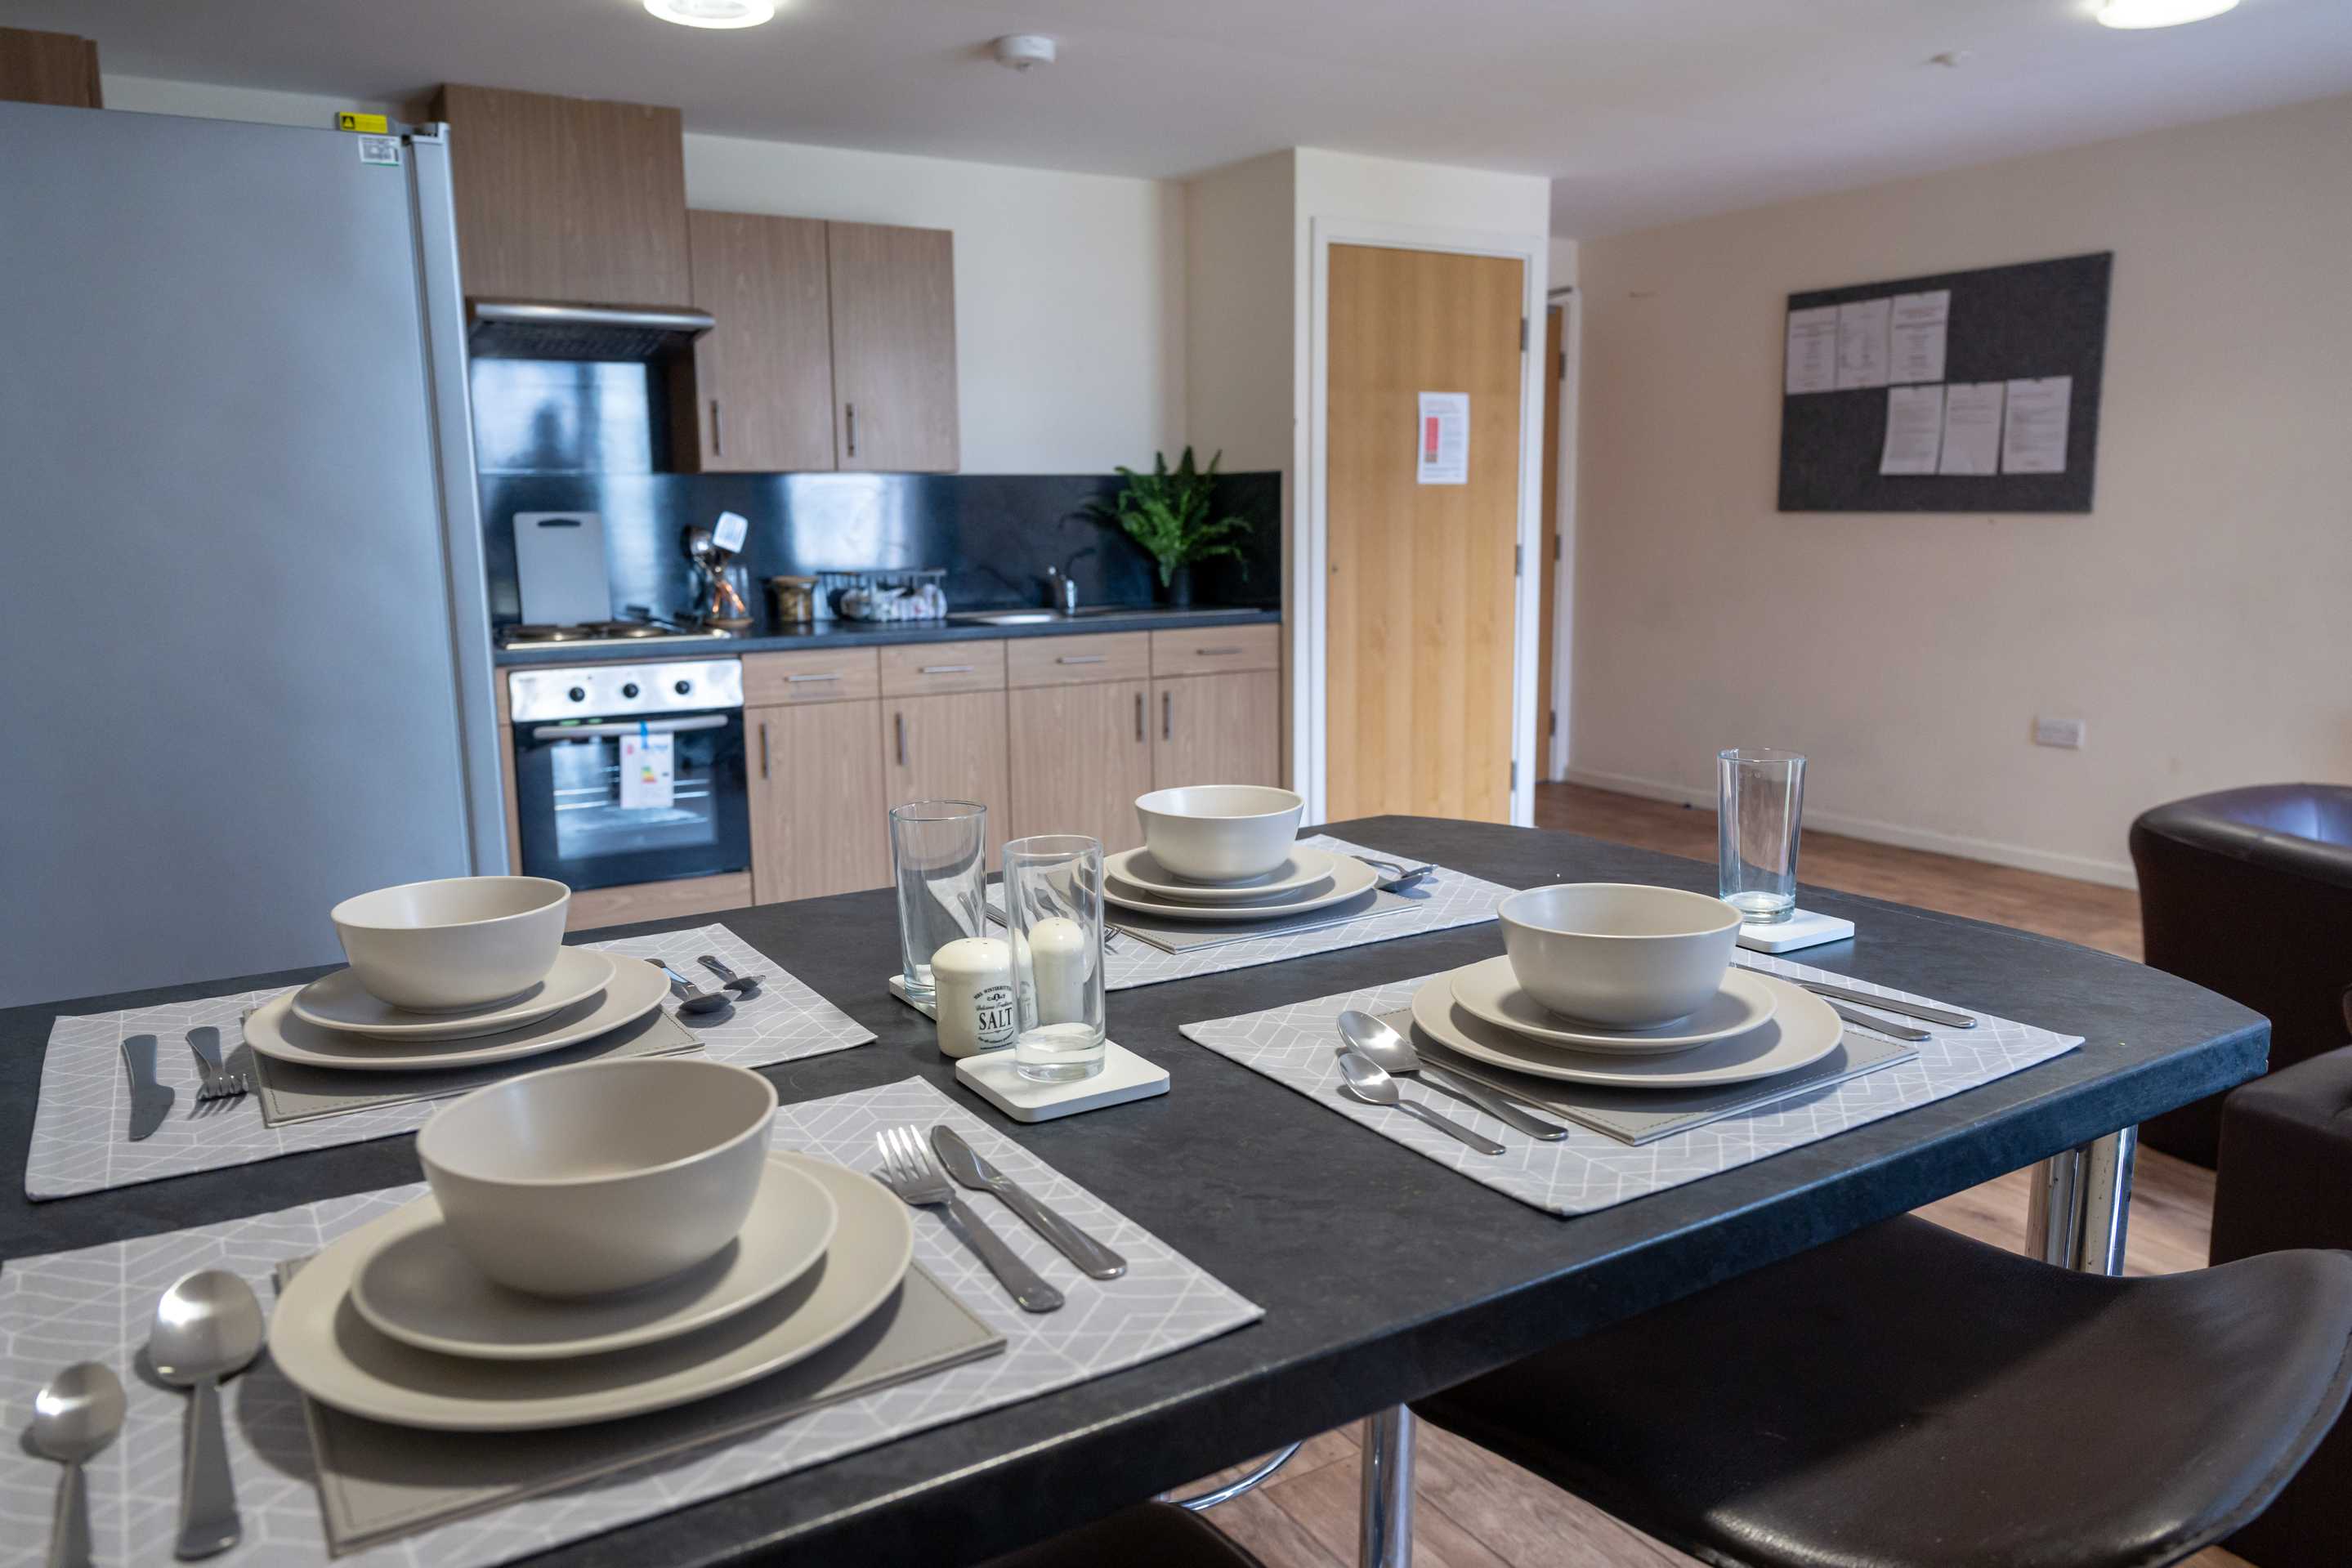 Kitchen and dinning area in student accommodation